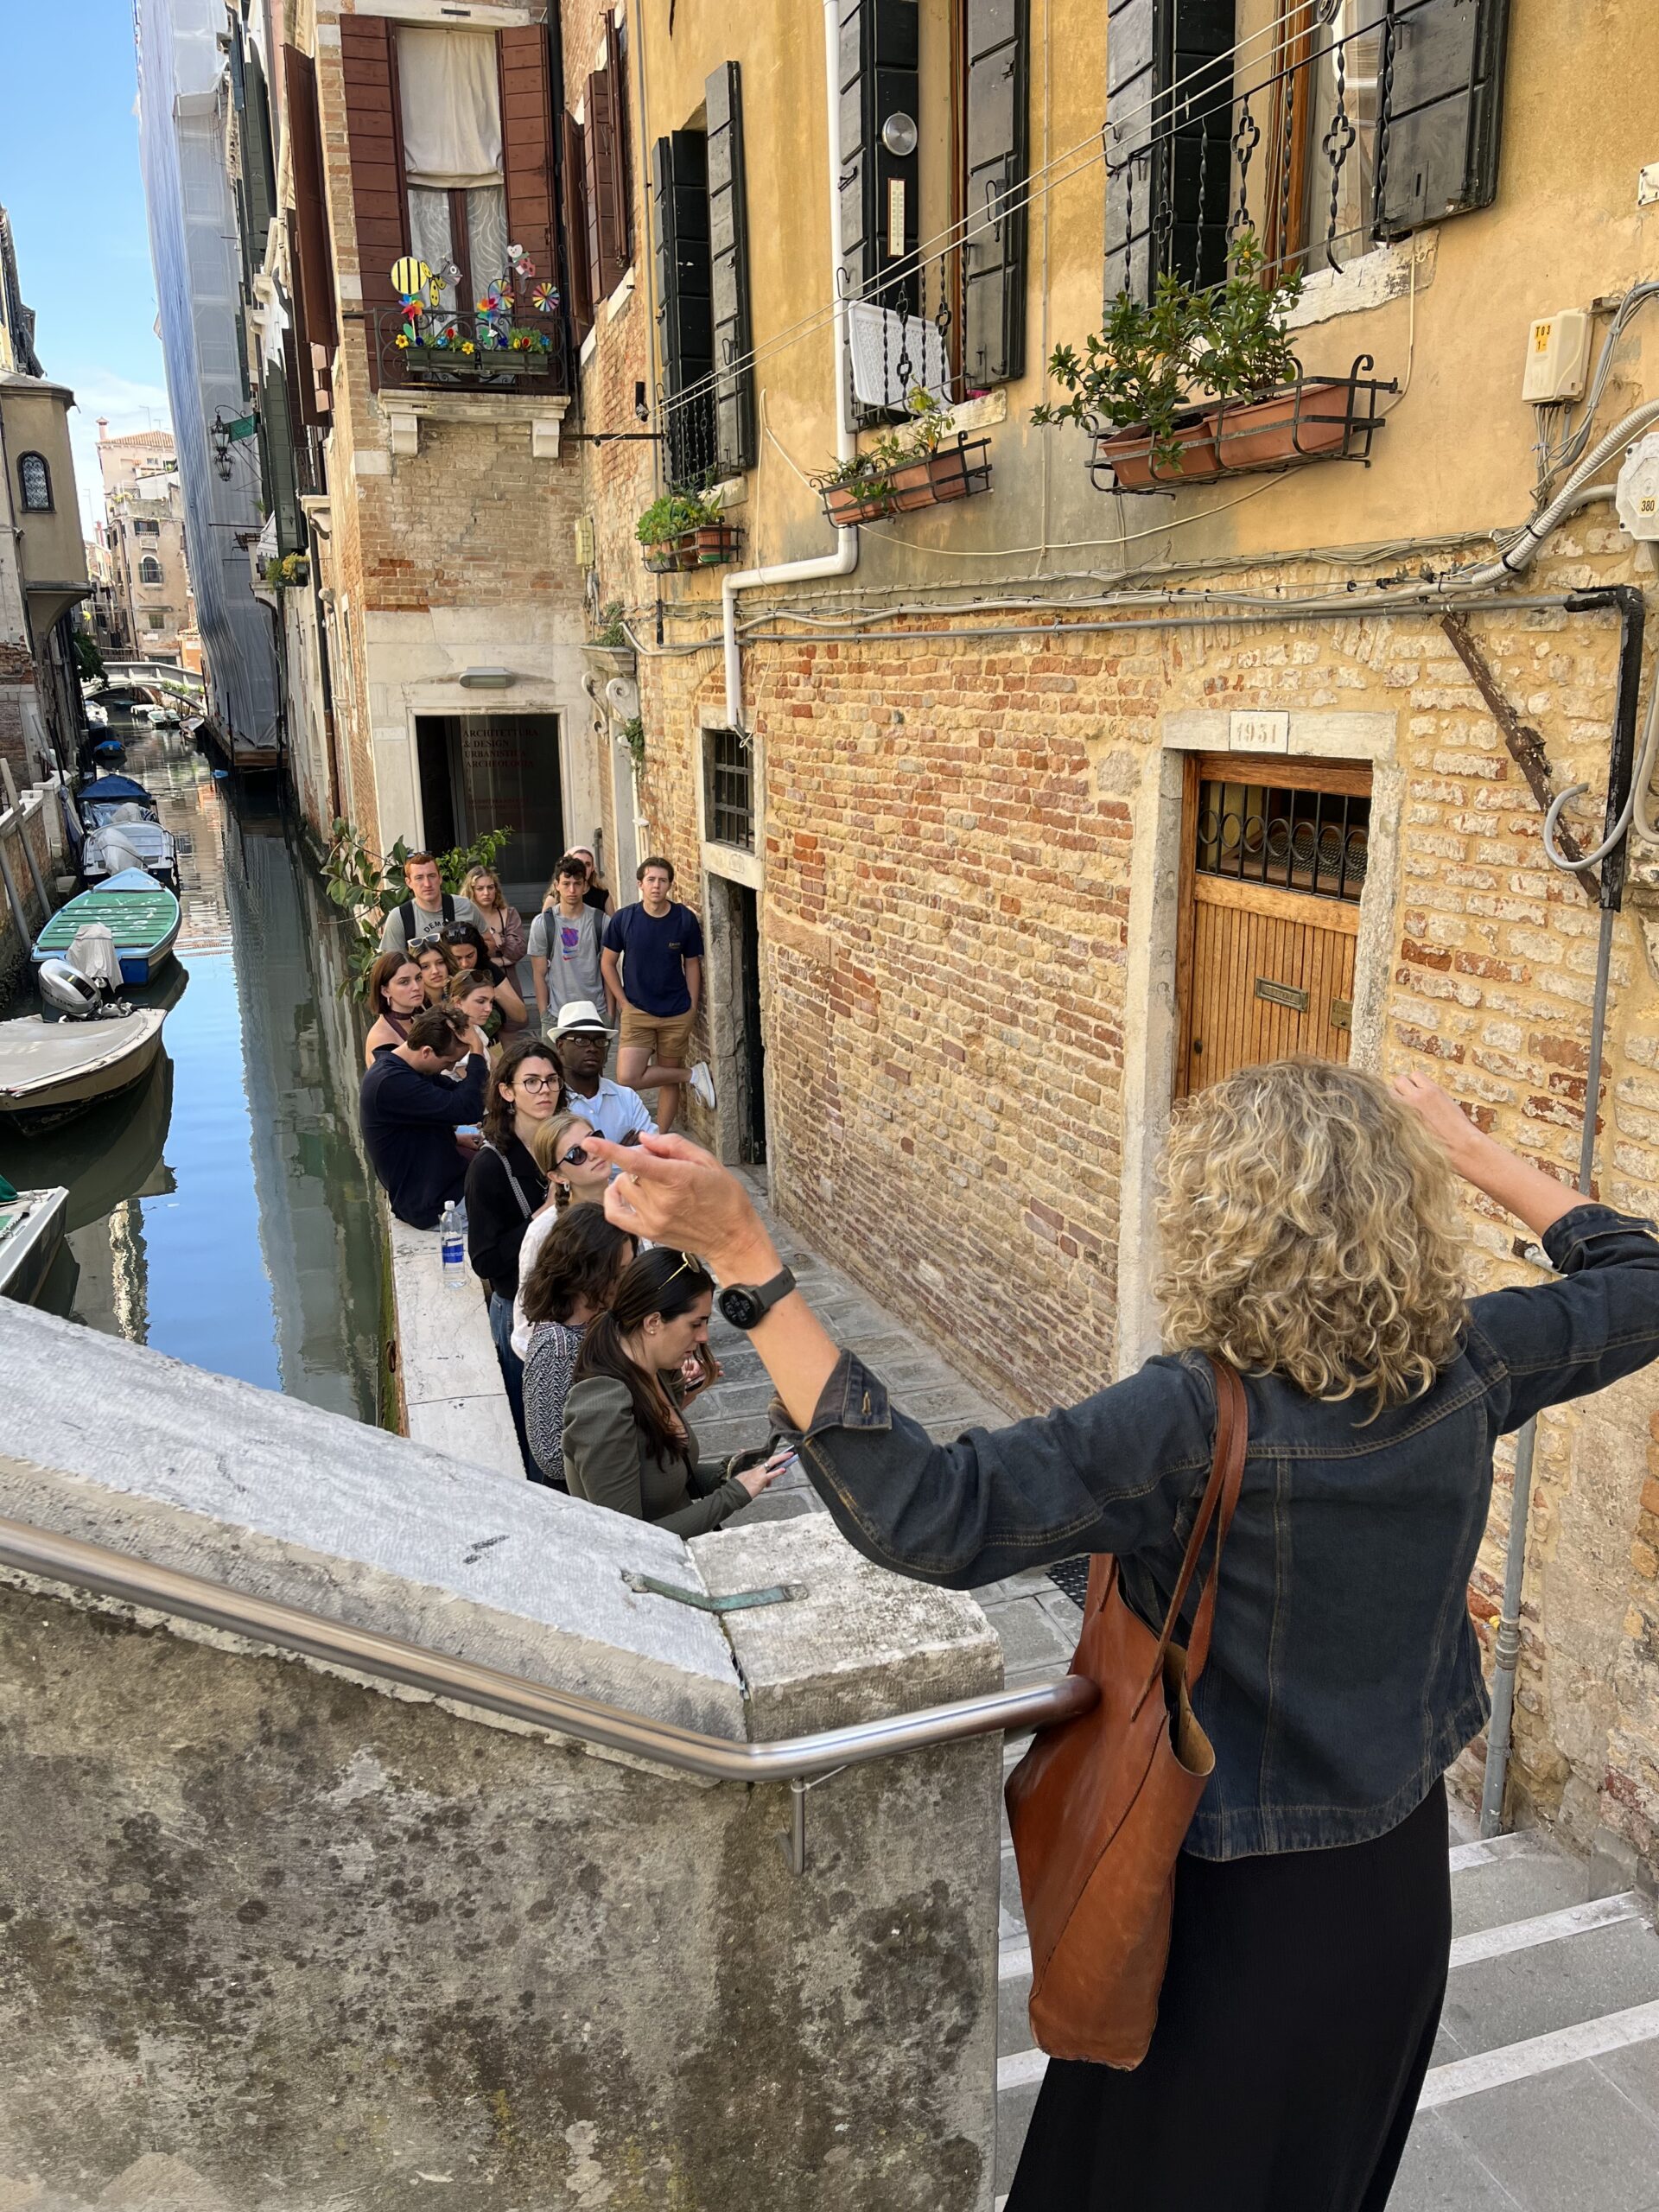 Venice, 2023: A professor with their back to the camera speaks to a group of students alongside a canal in Venice. 